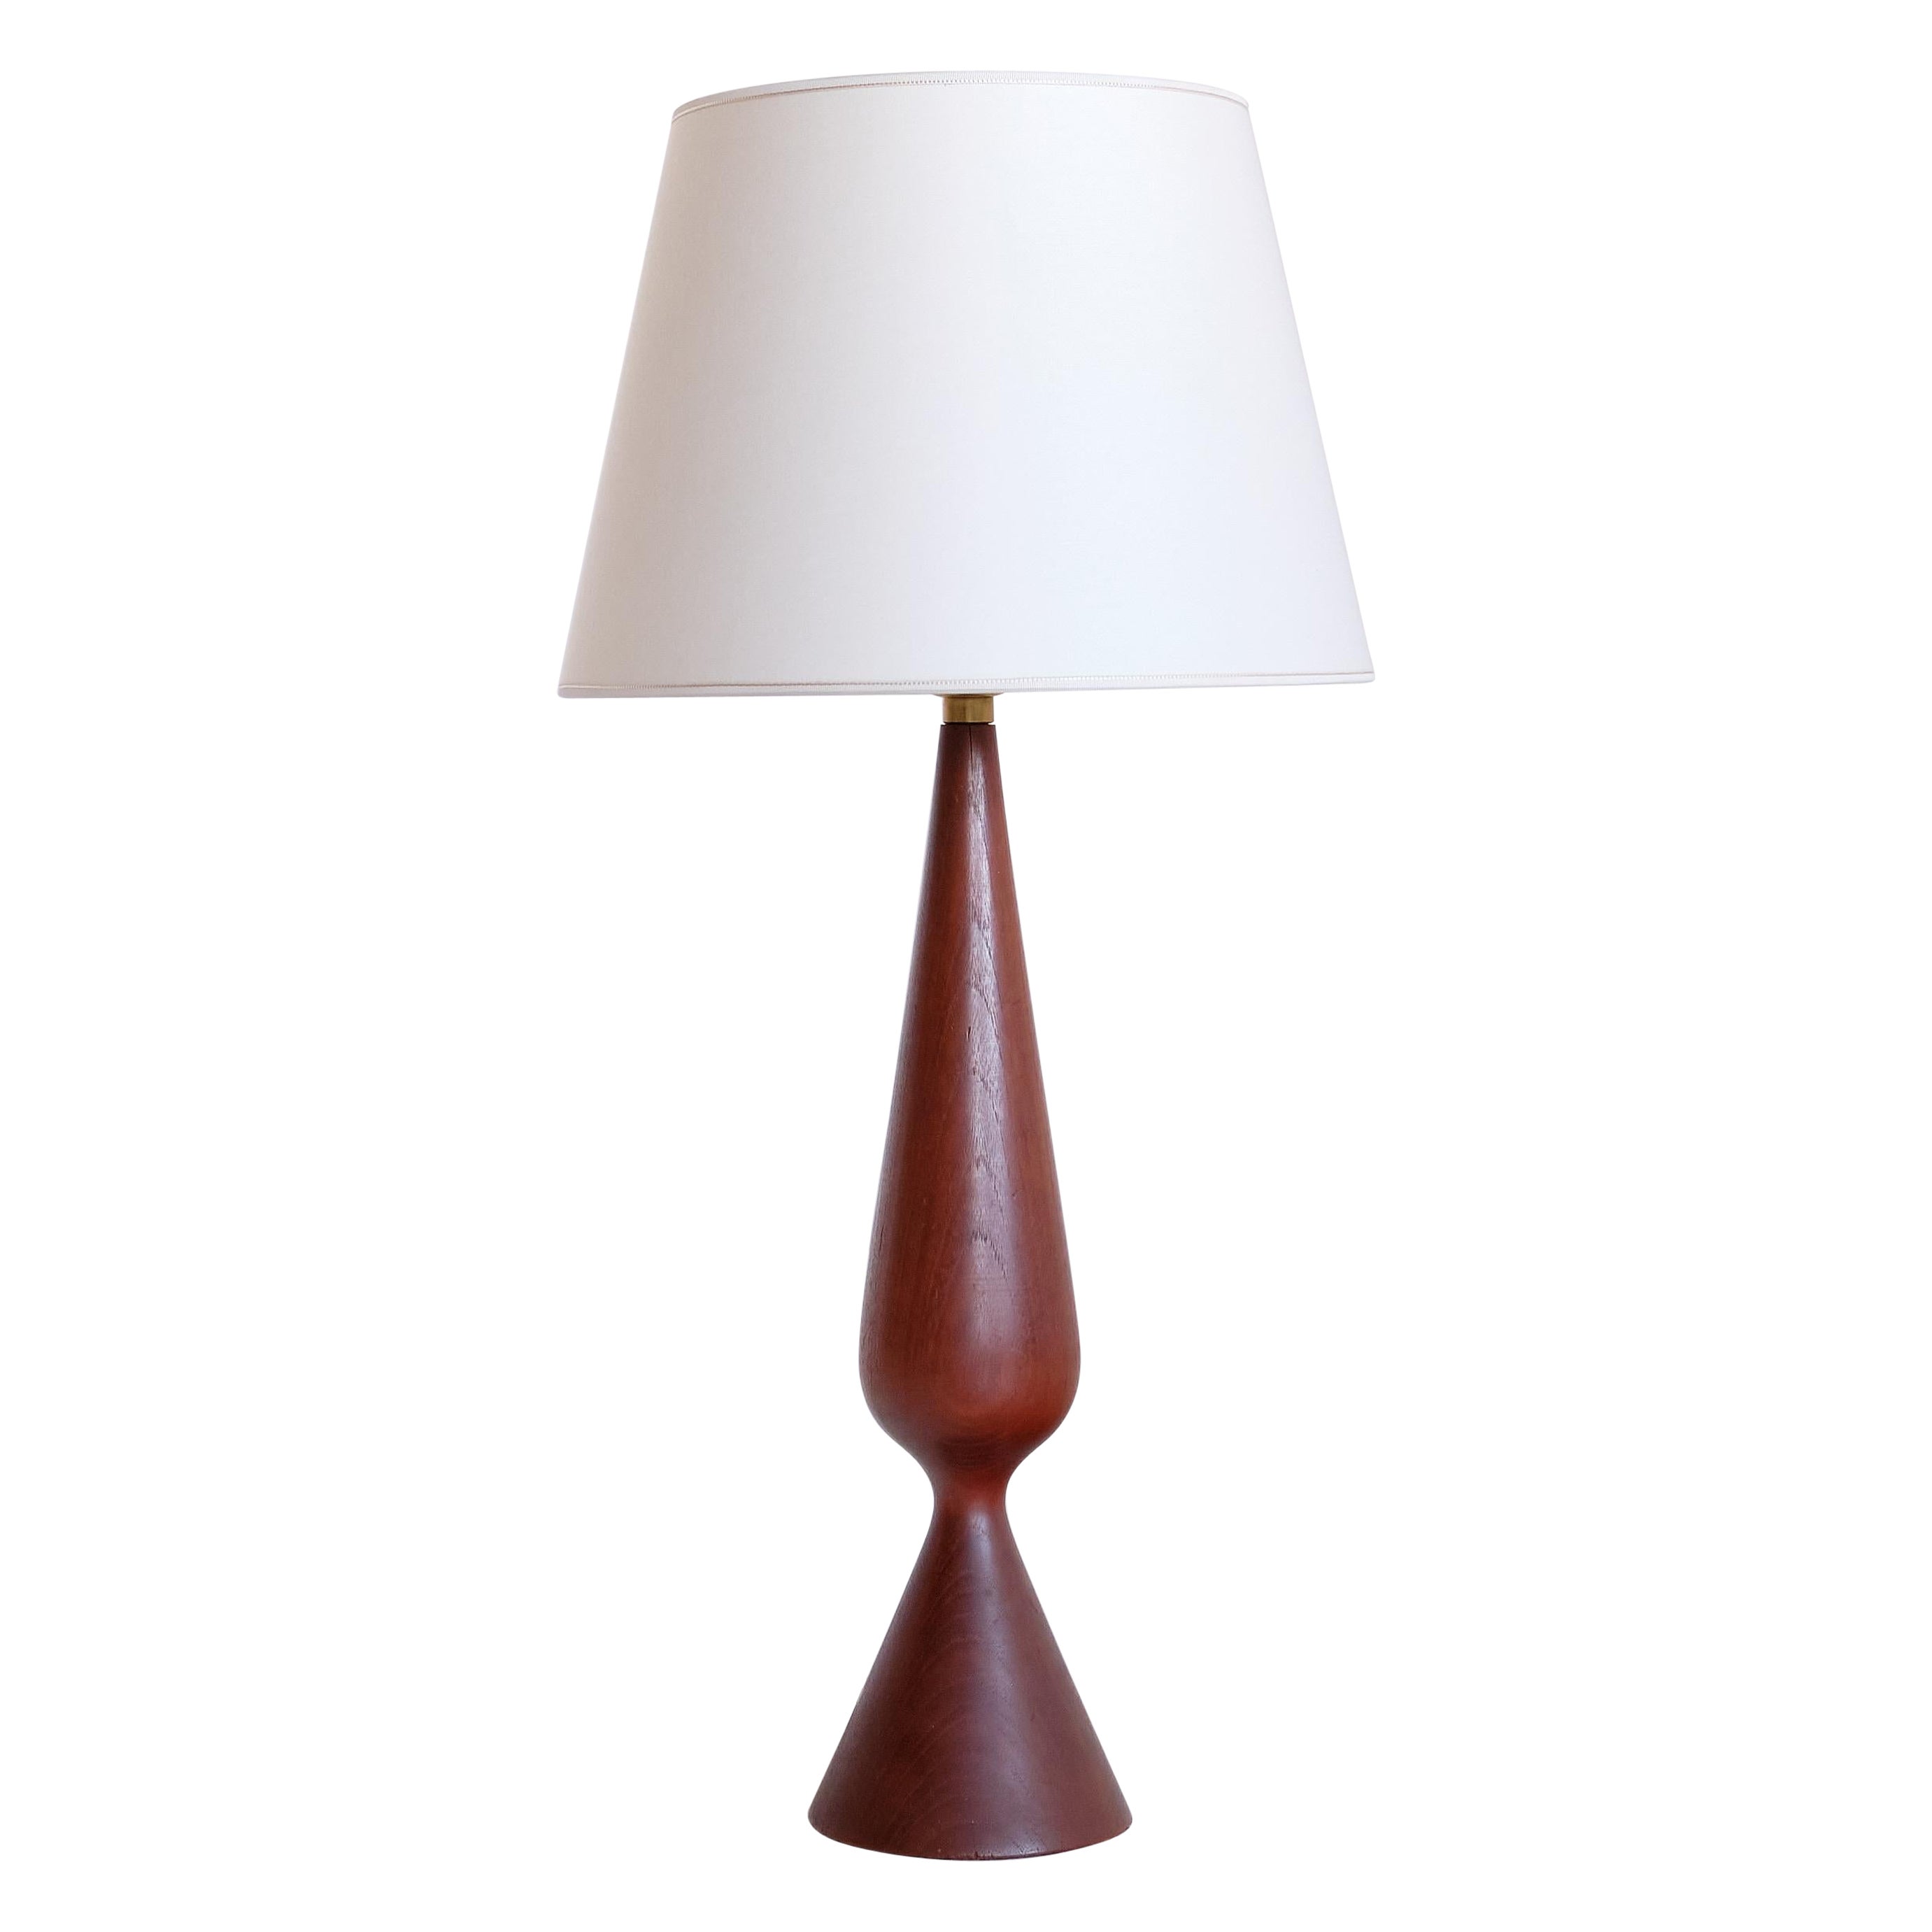 Sculptural Table Lamp in Teak Wood and Ivory Drum Shade, Denmark, 1960s